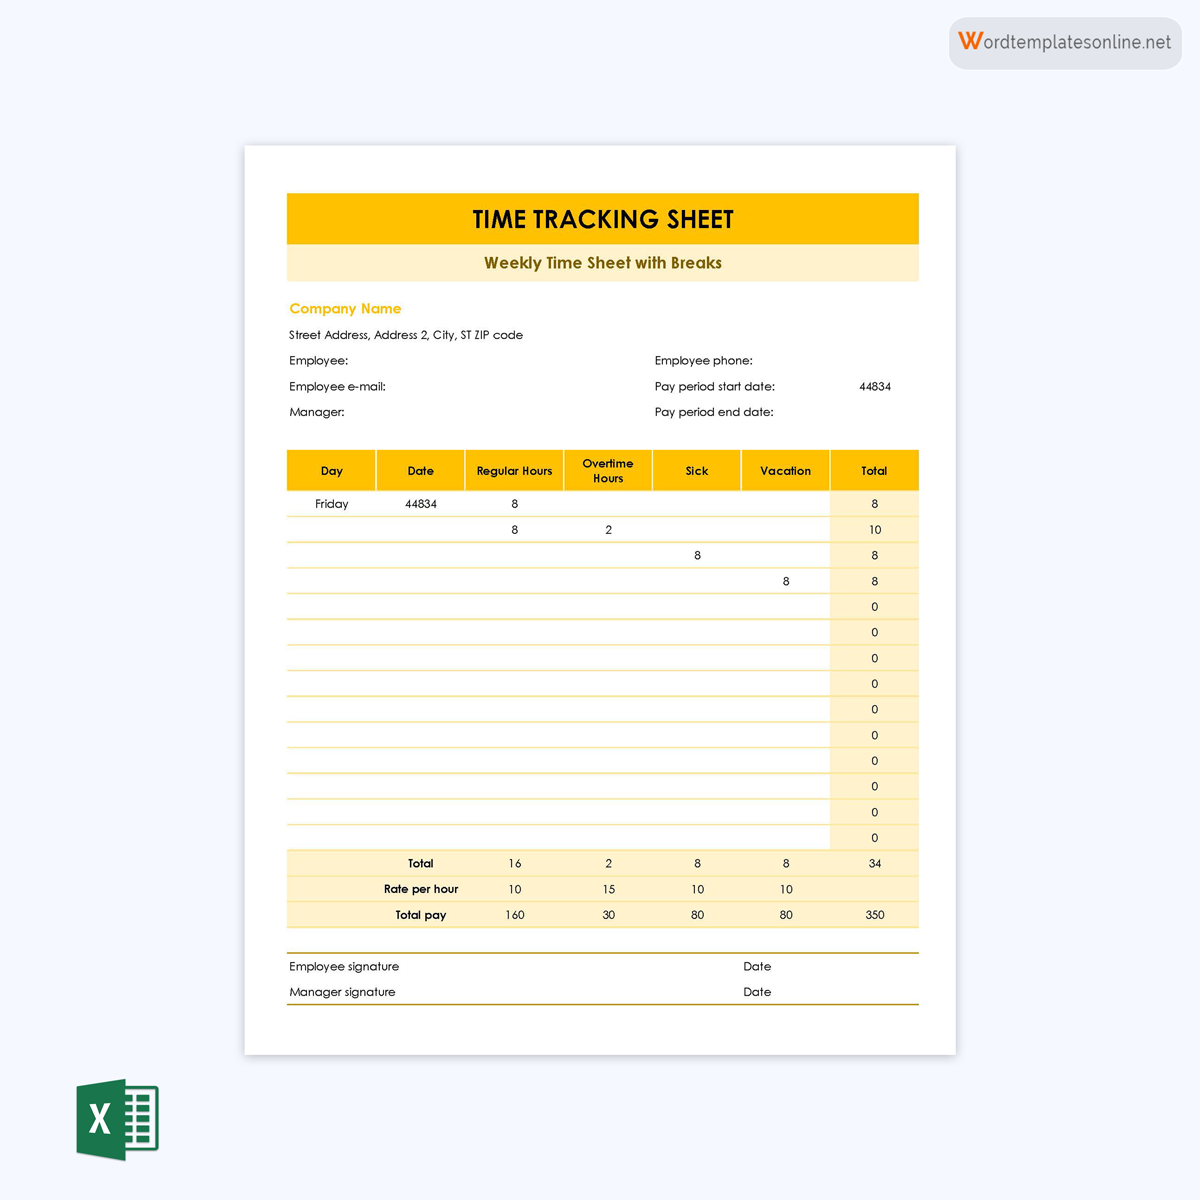 Free Customizable Time Tracking Spreadsheet Template 10 as Excel Sheet